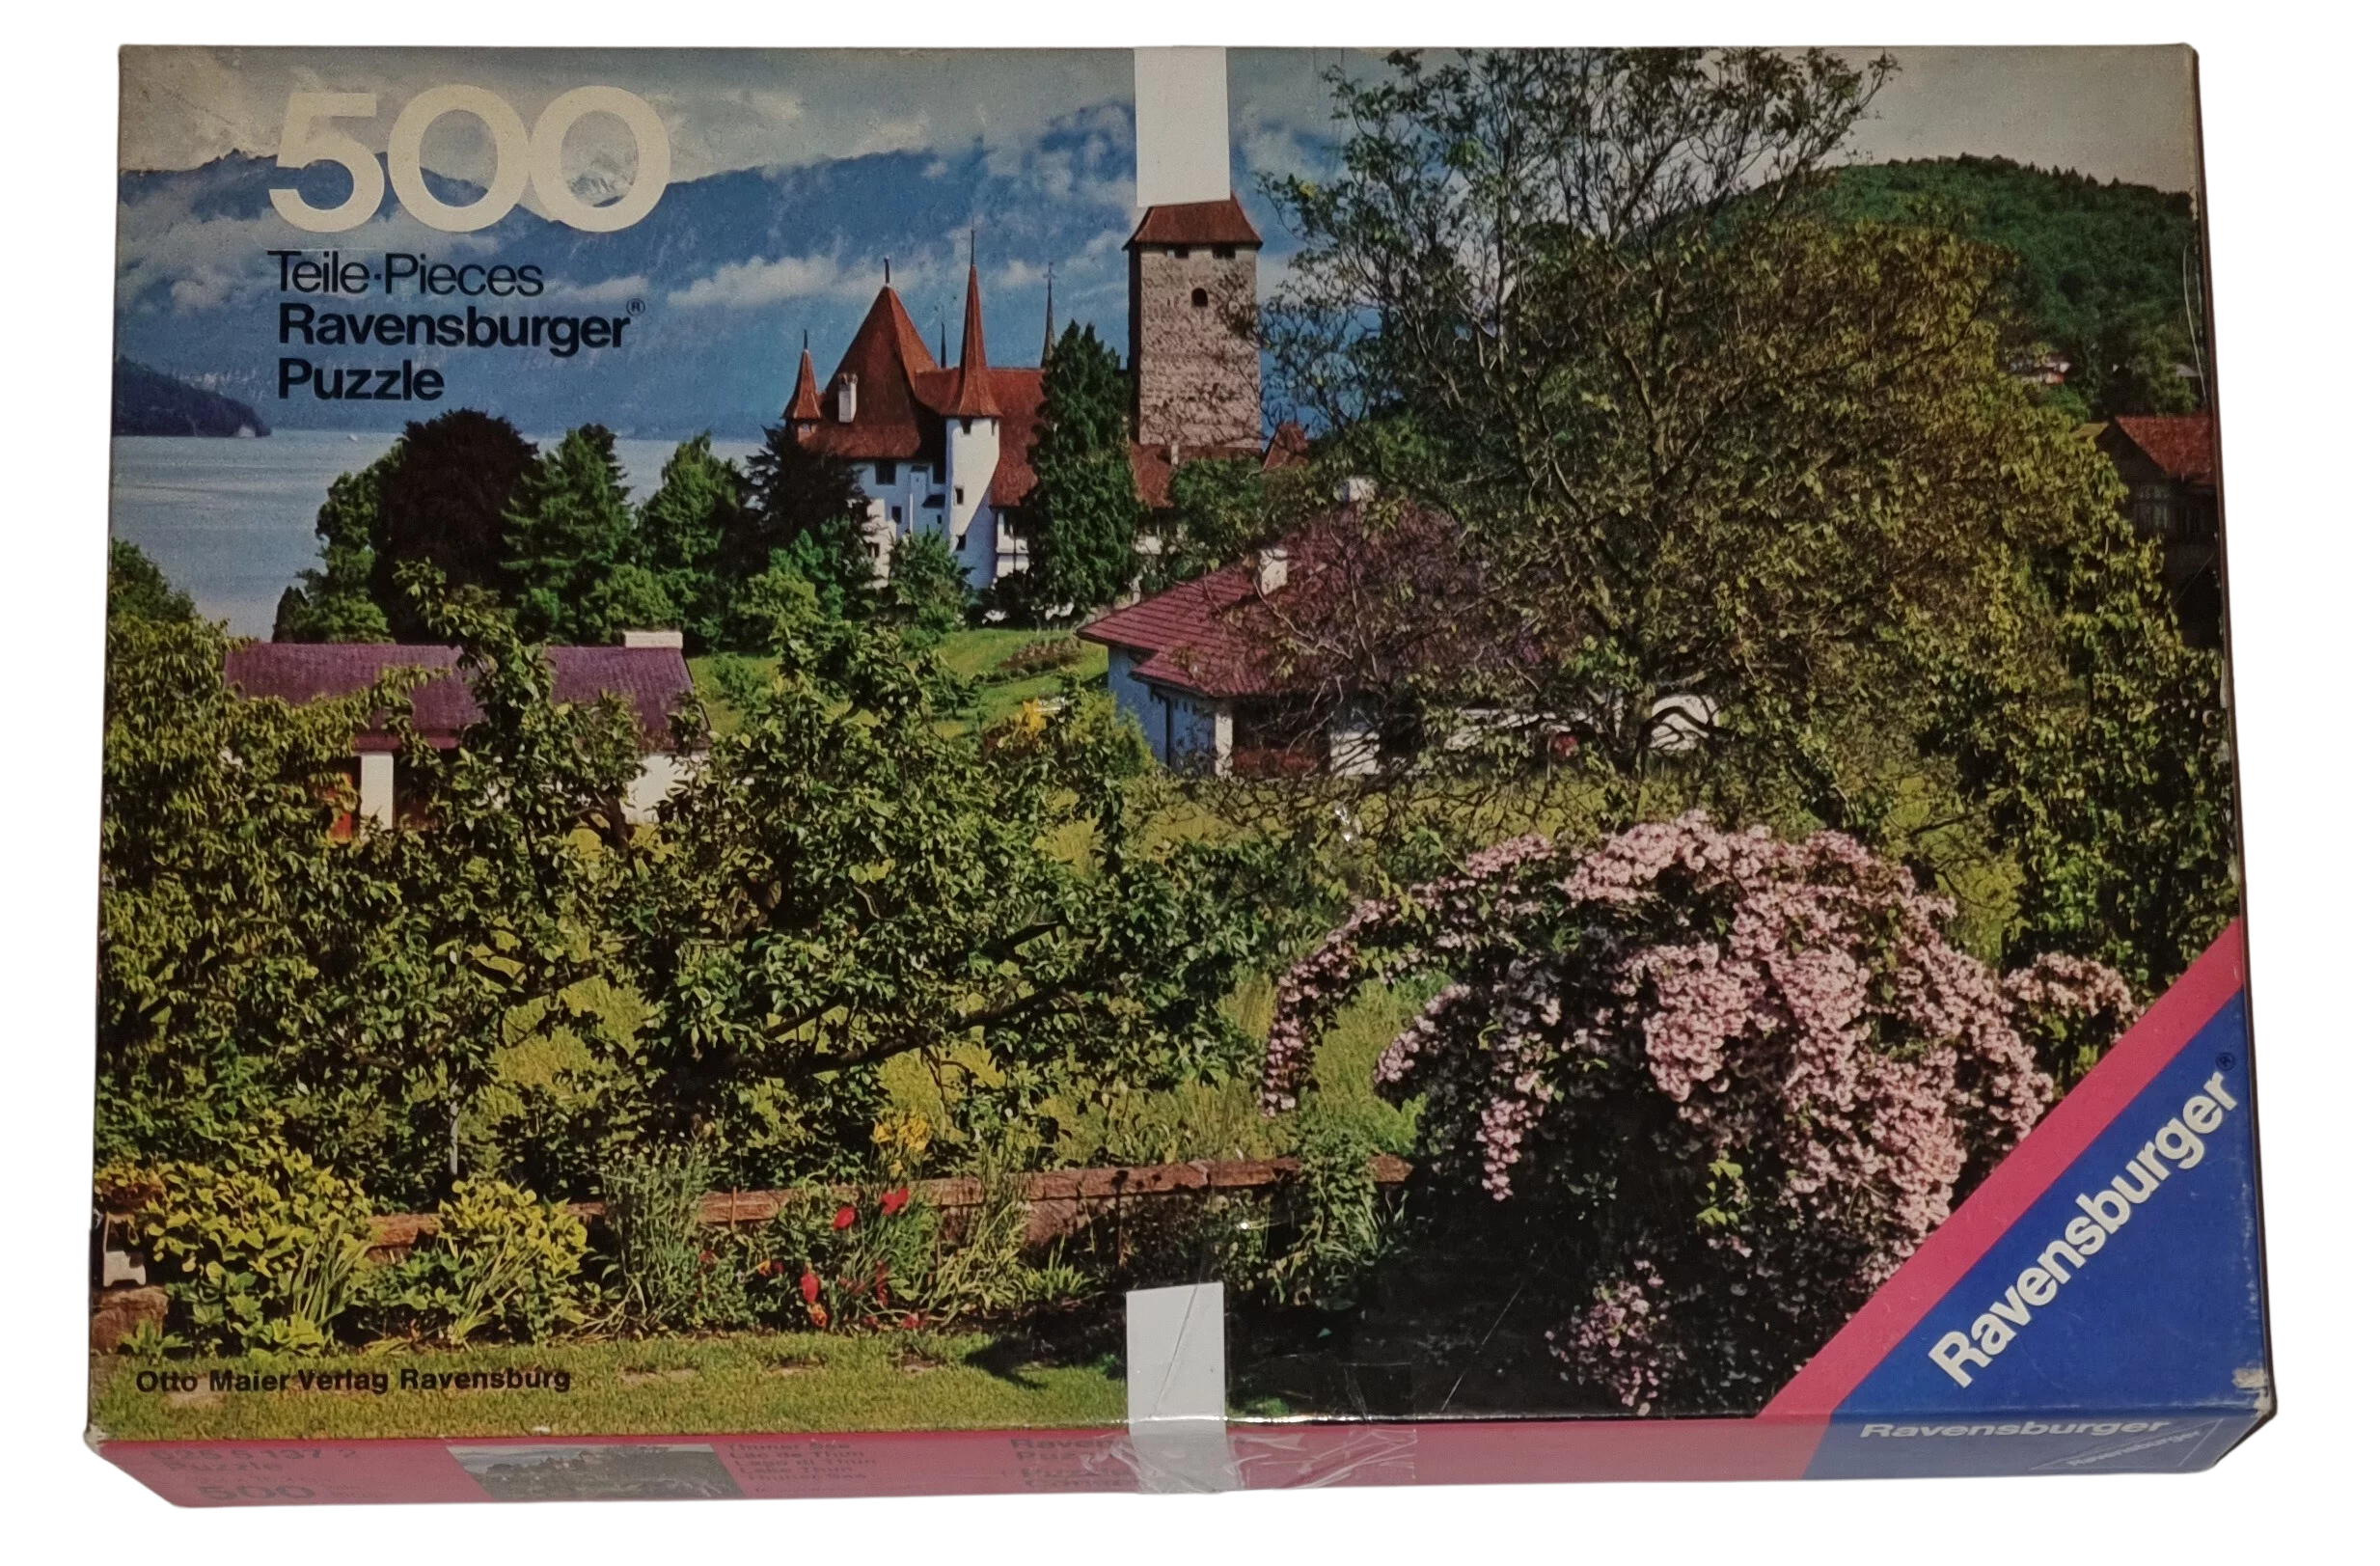 Ravensburger Puzzle 500 Teile Thuner See 62551372